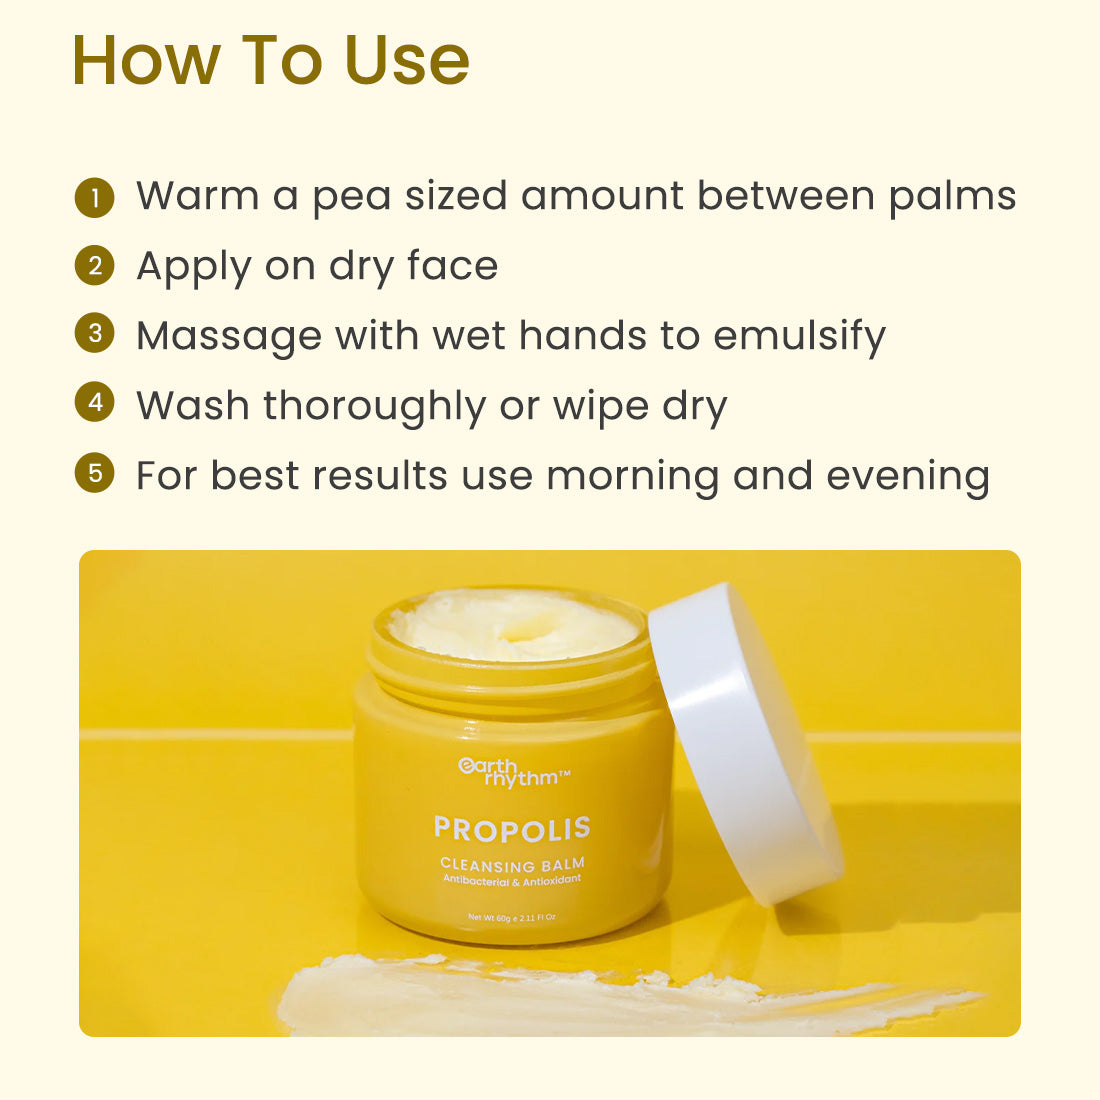 CLEANSING BALM WITH PROPOLIS